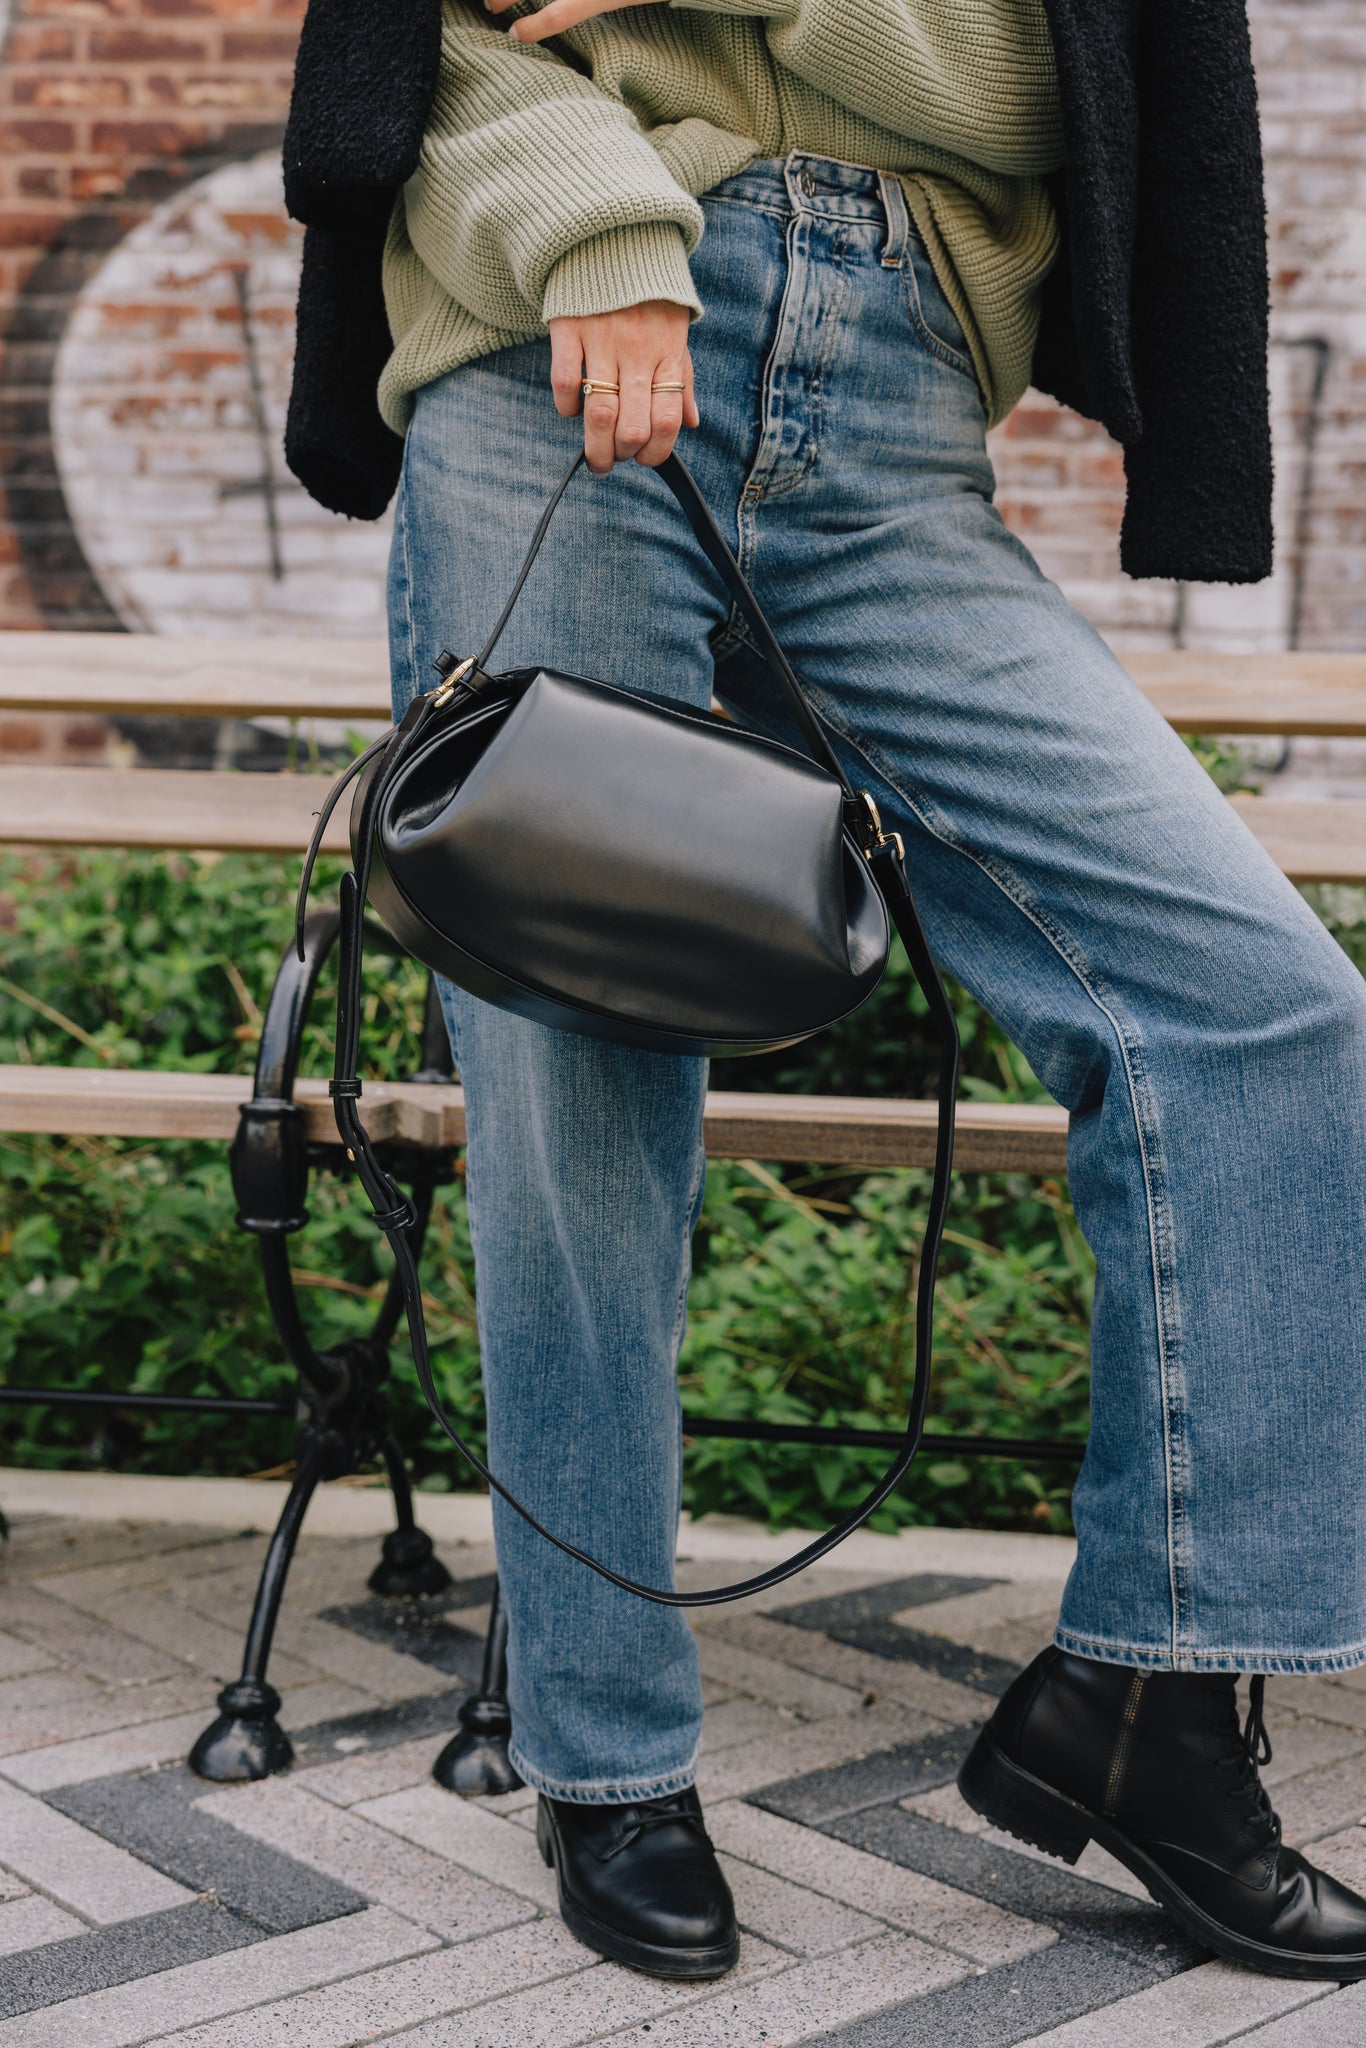 The BOWERY Bag